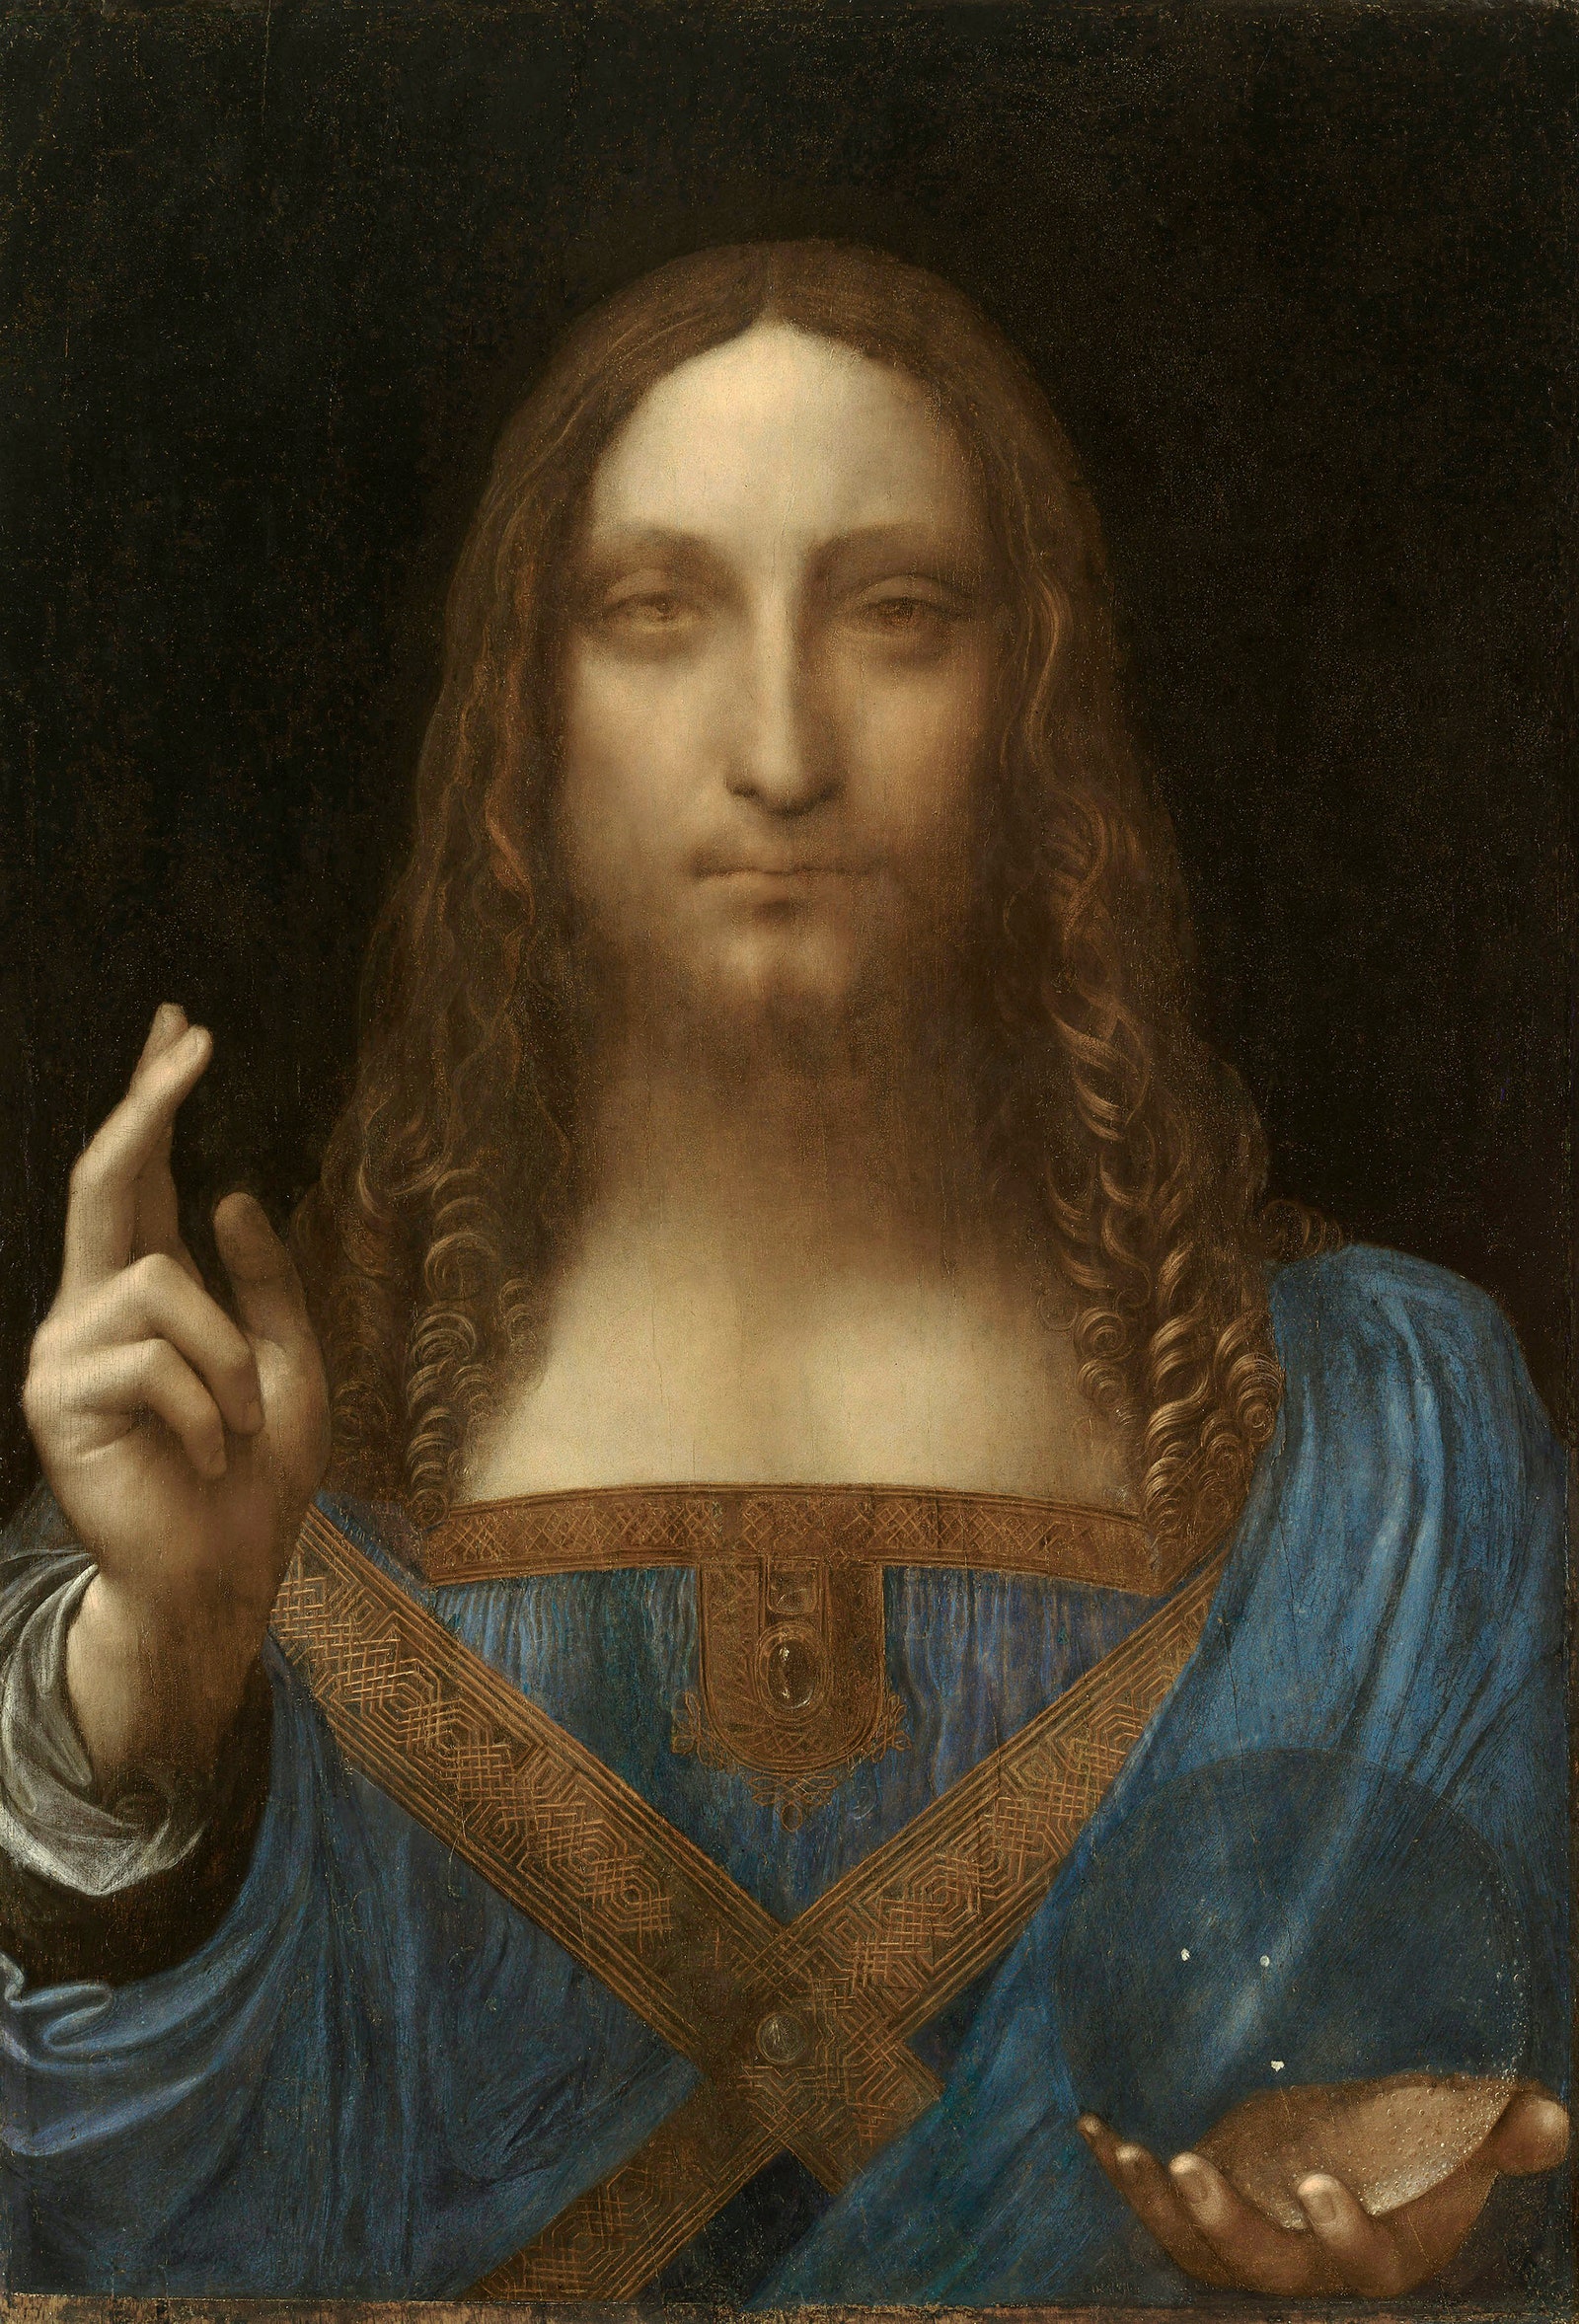 The 5 most expensive paintings of all time, the 1st place is true to every detail but controversial - Photo 1.